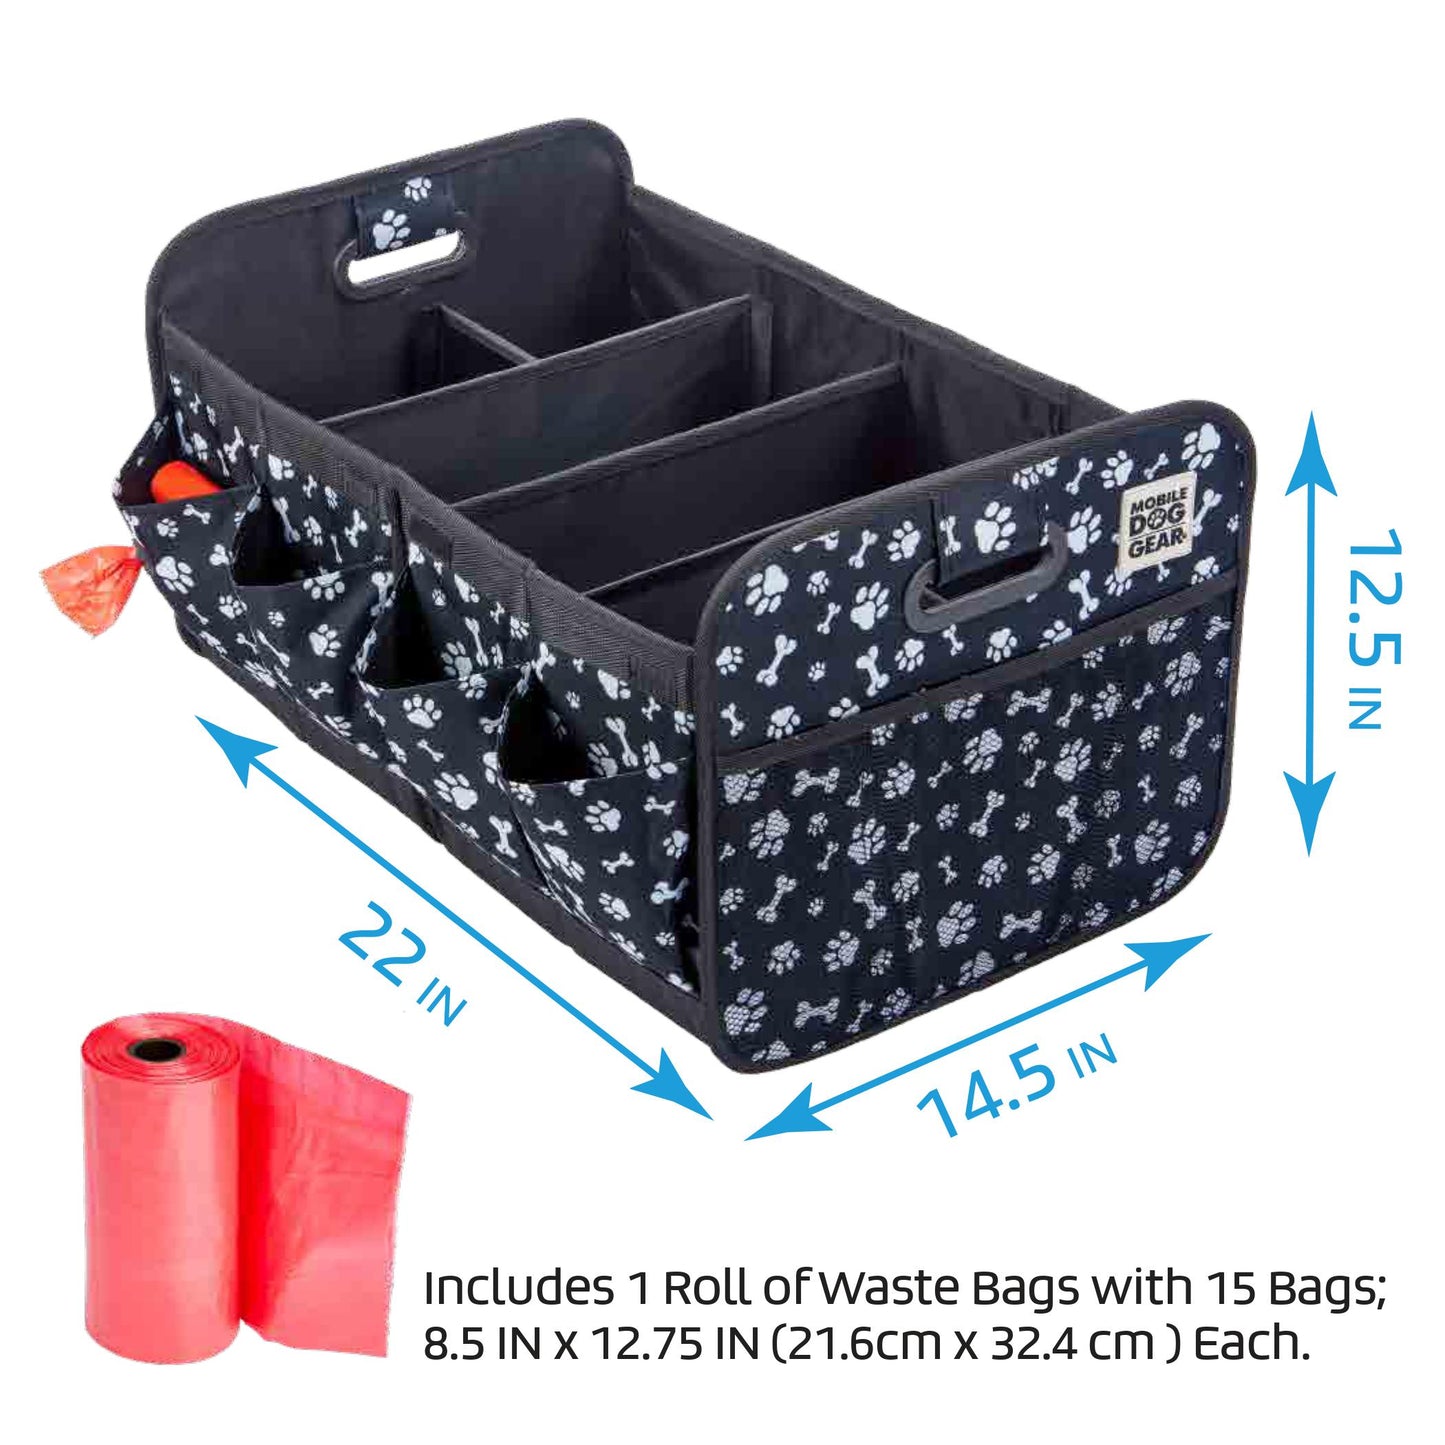 Dogssentials Collapsible Storage Organizer With Built-In Waste Bag Dispenser & 1 Bag Roll